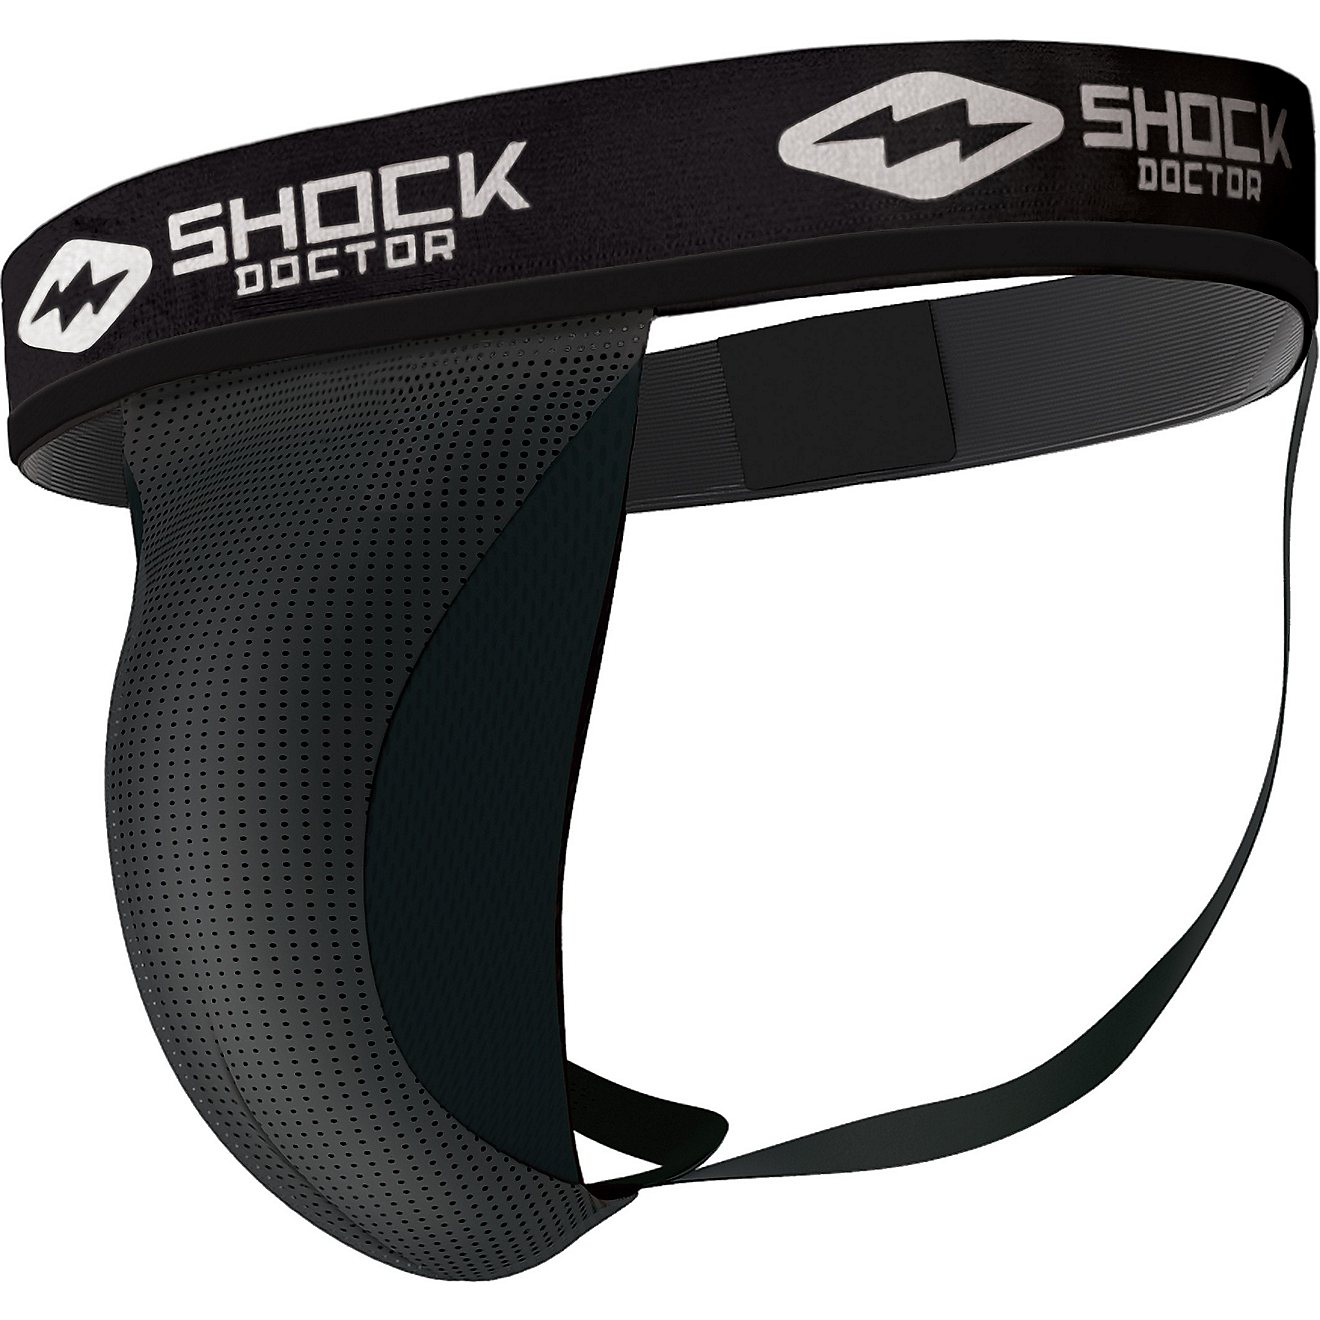 Shock Doctor Core Athletic Supporter with Cup Pocket                                                                             - view number 1